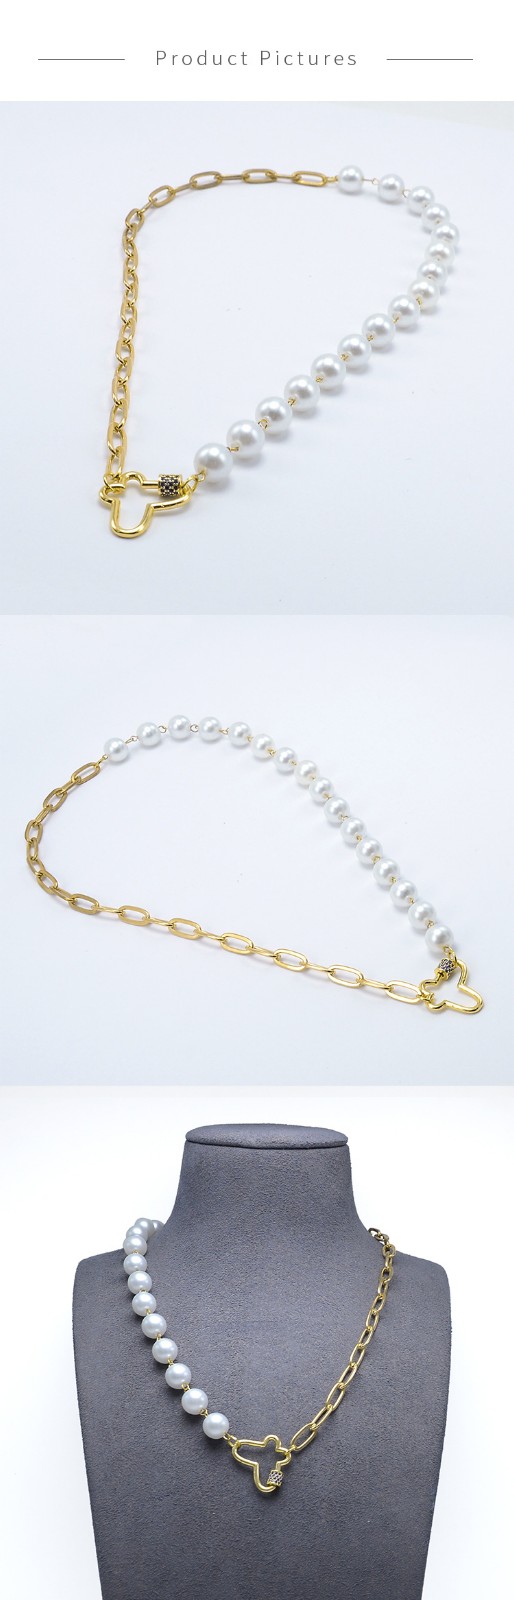 Butterfly Carabiner Half  Pearl Half Gold Chian Necklace